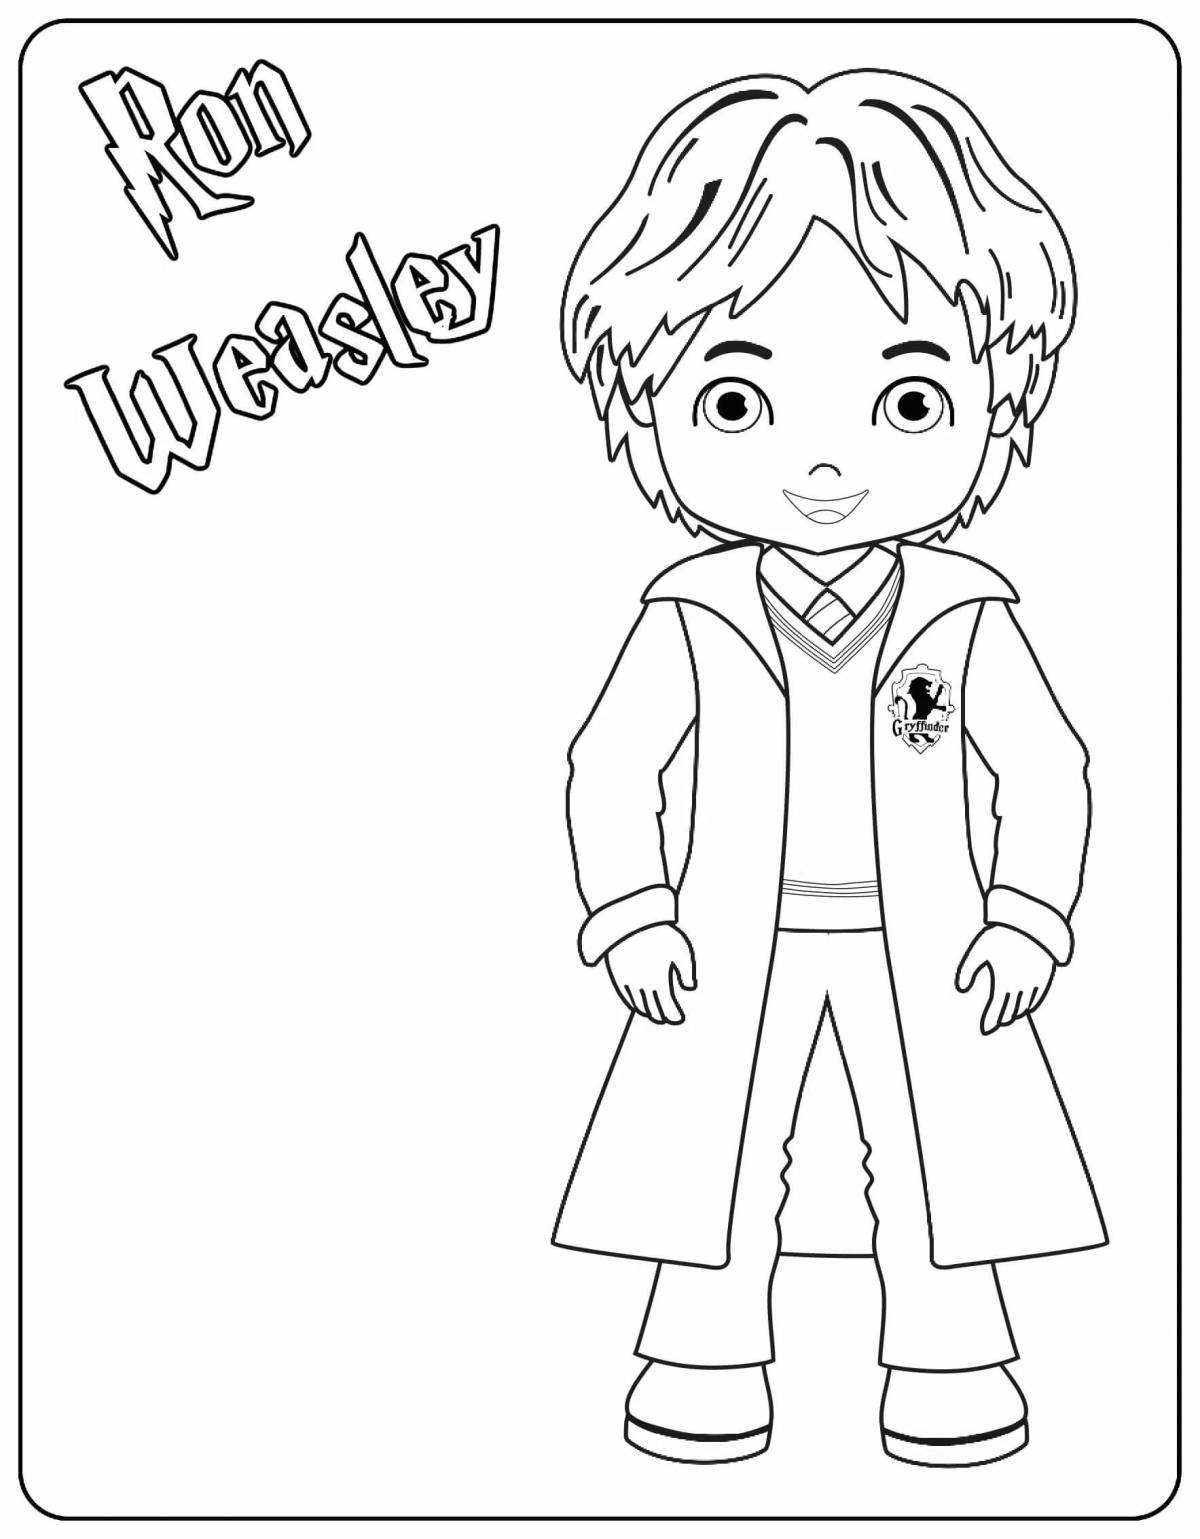 Fabulous incorrigible ron coloring page